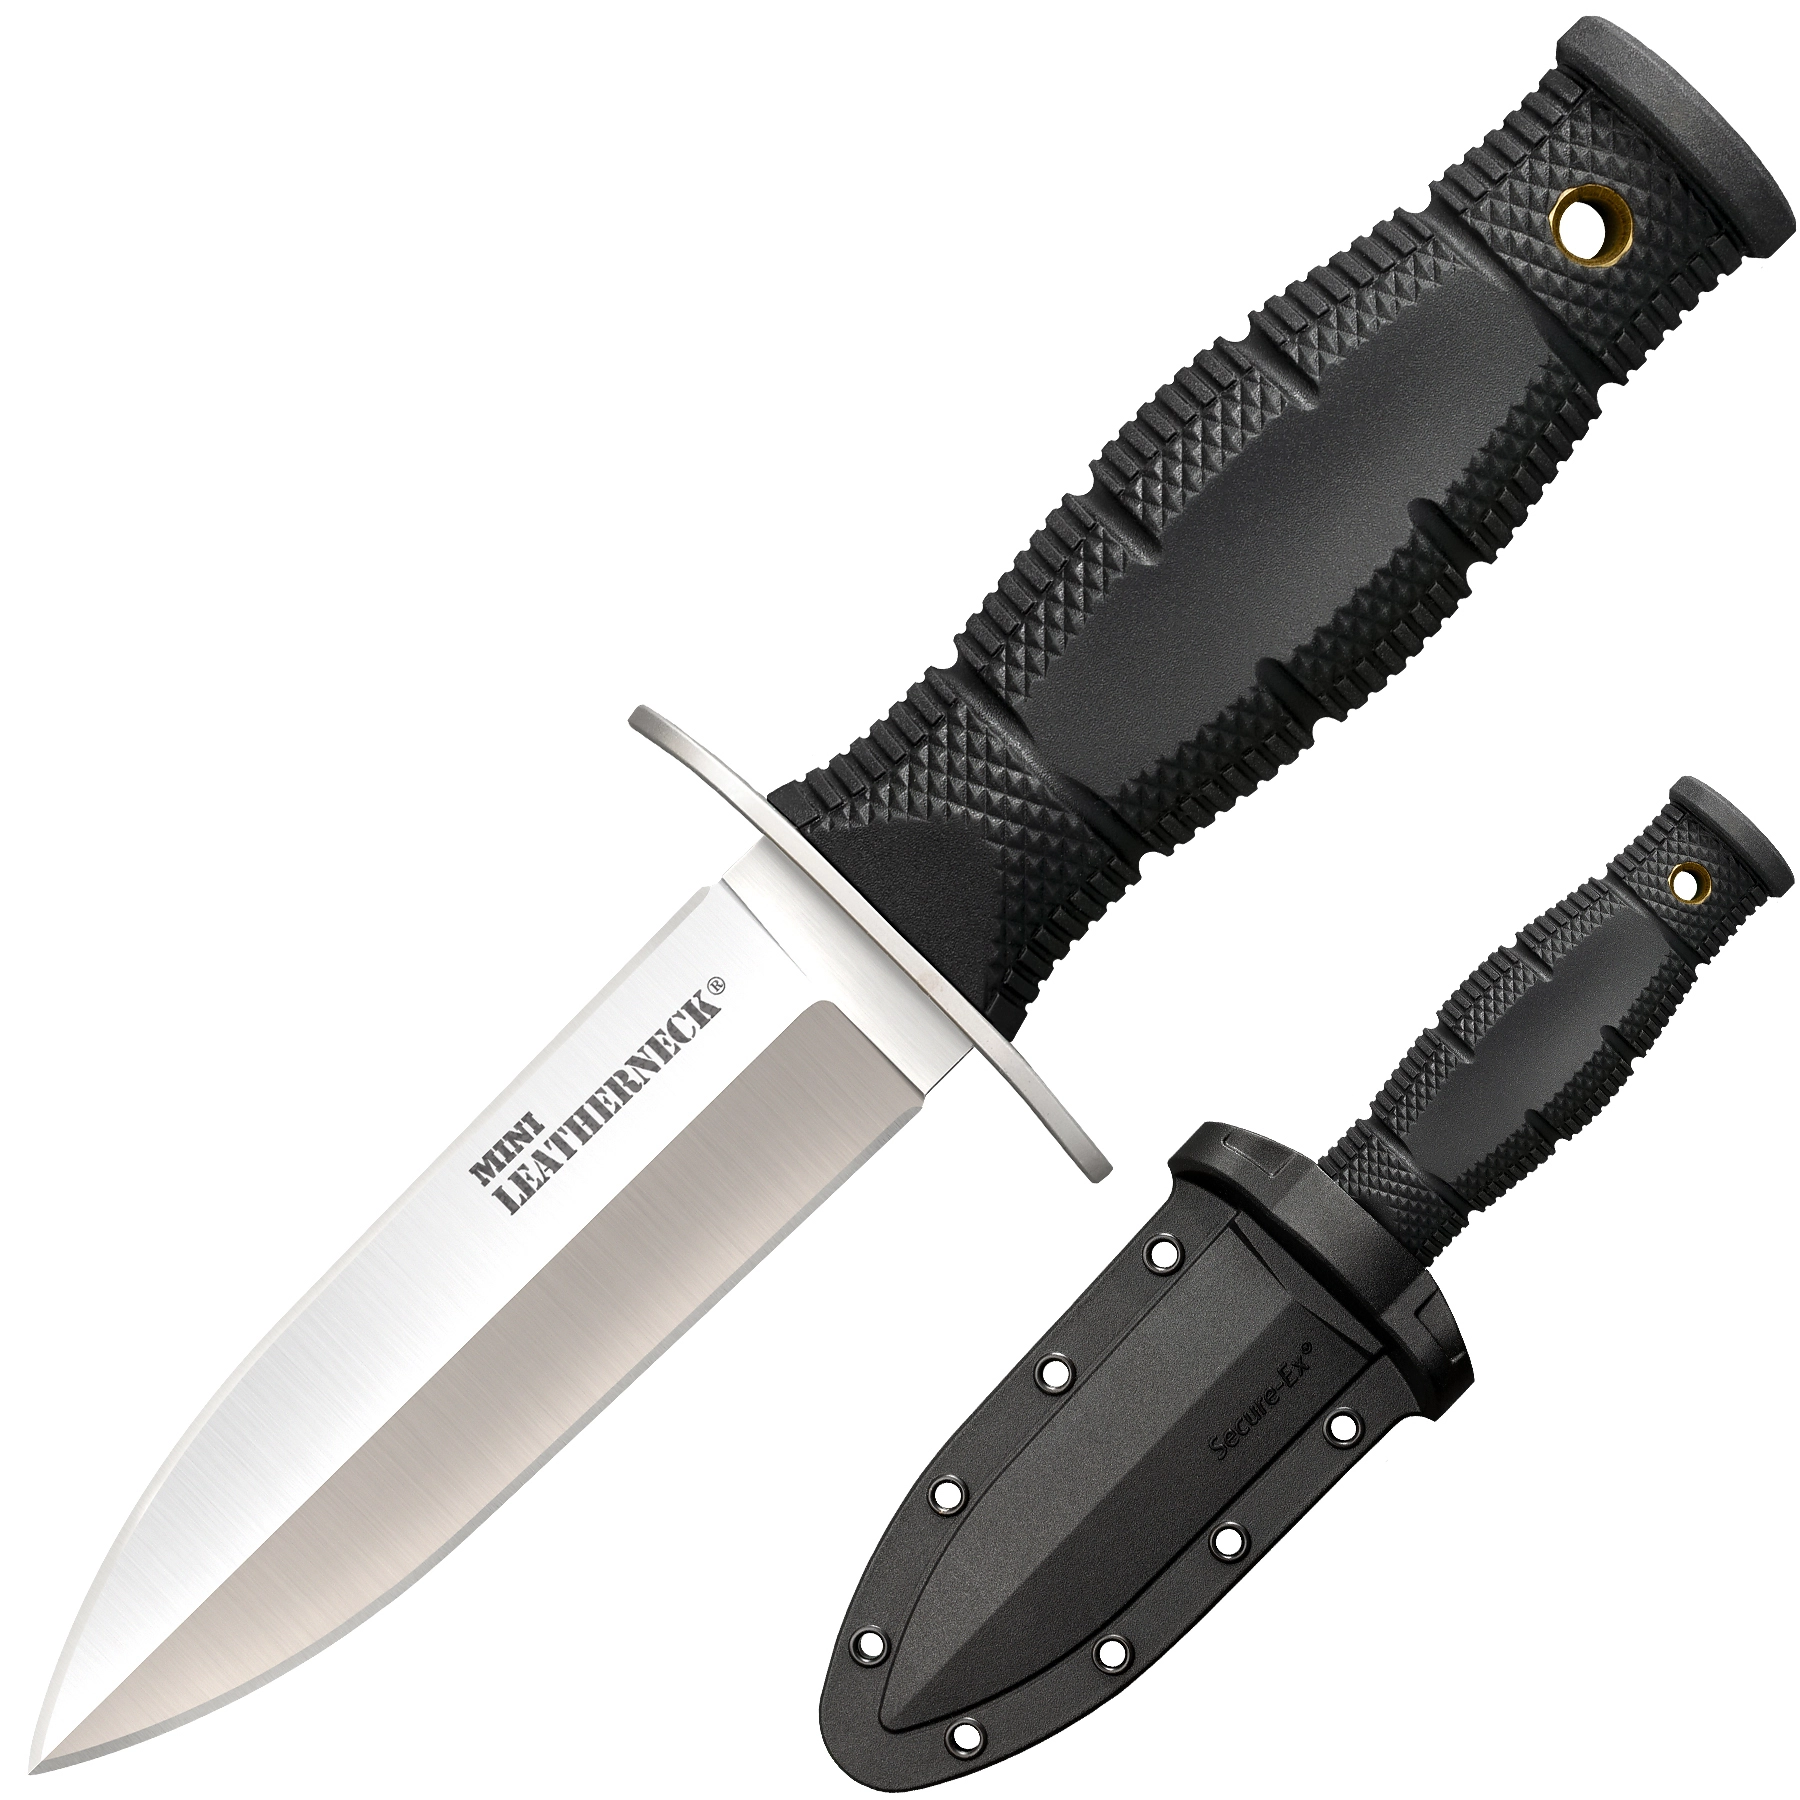 Cold Steel Mini Leatherneck Boot Knife – Spear Point